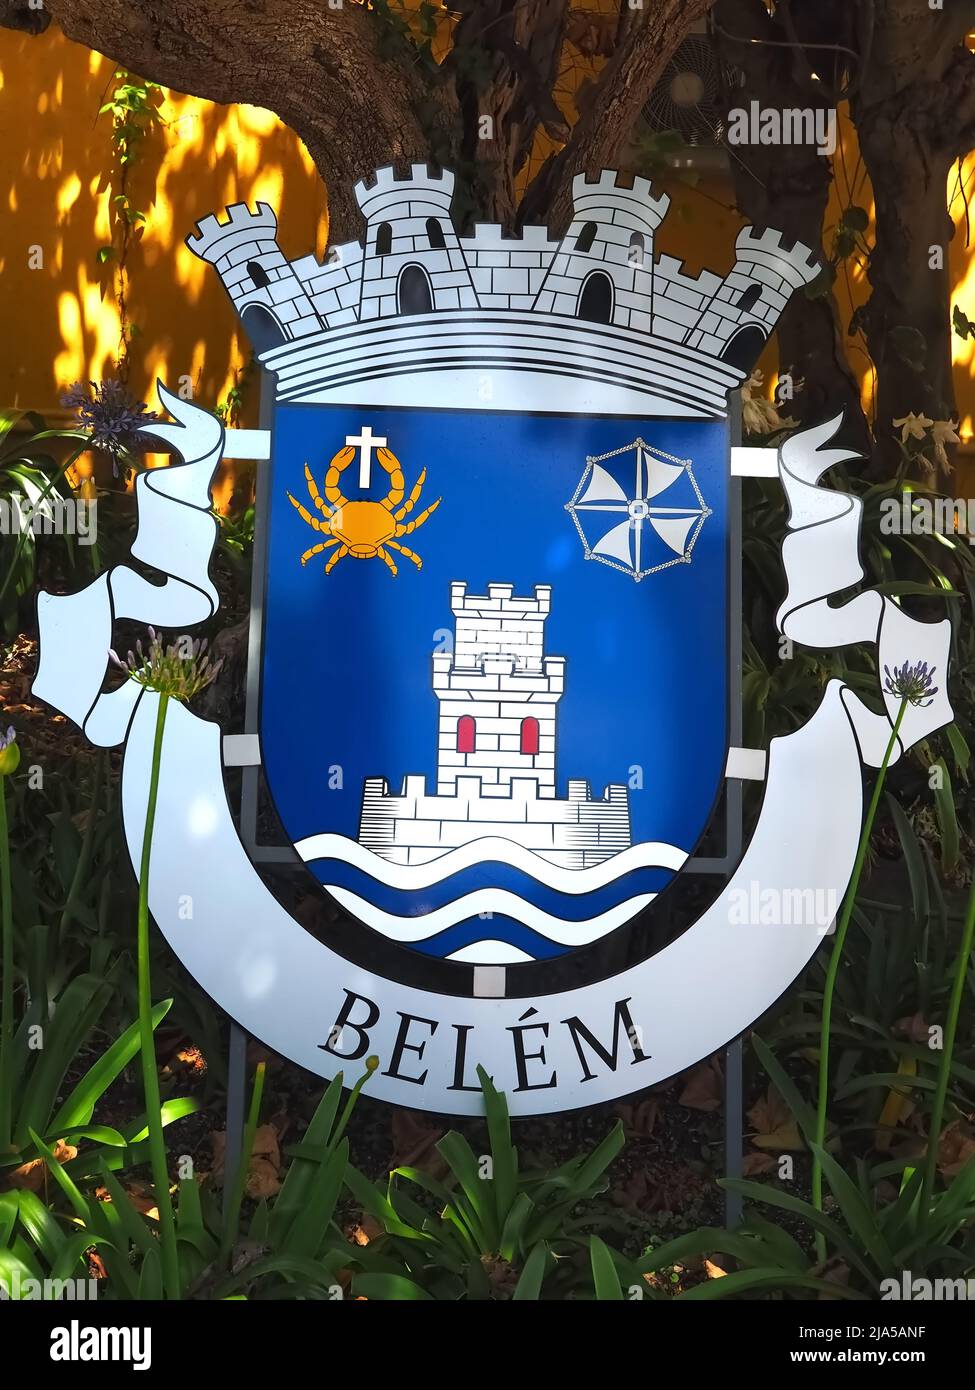 Coat of arms of Belem in Lisbon, Portugal Stock Photo